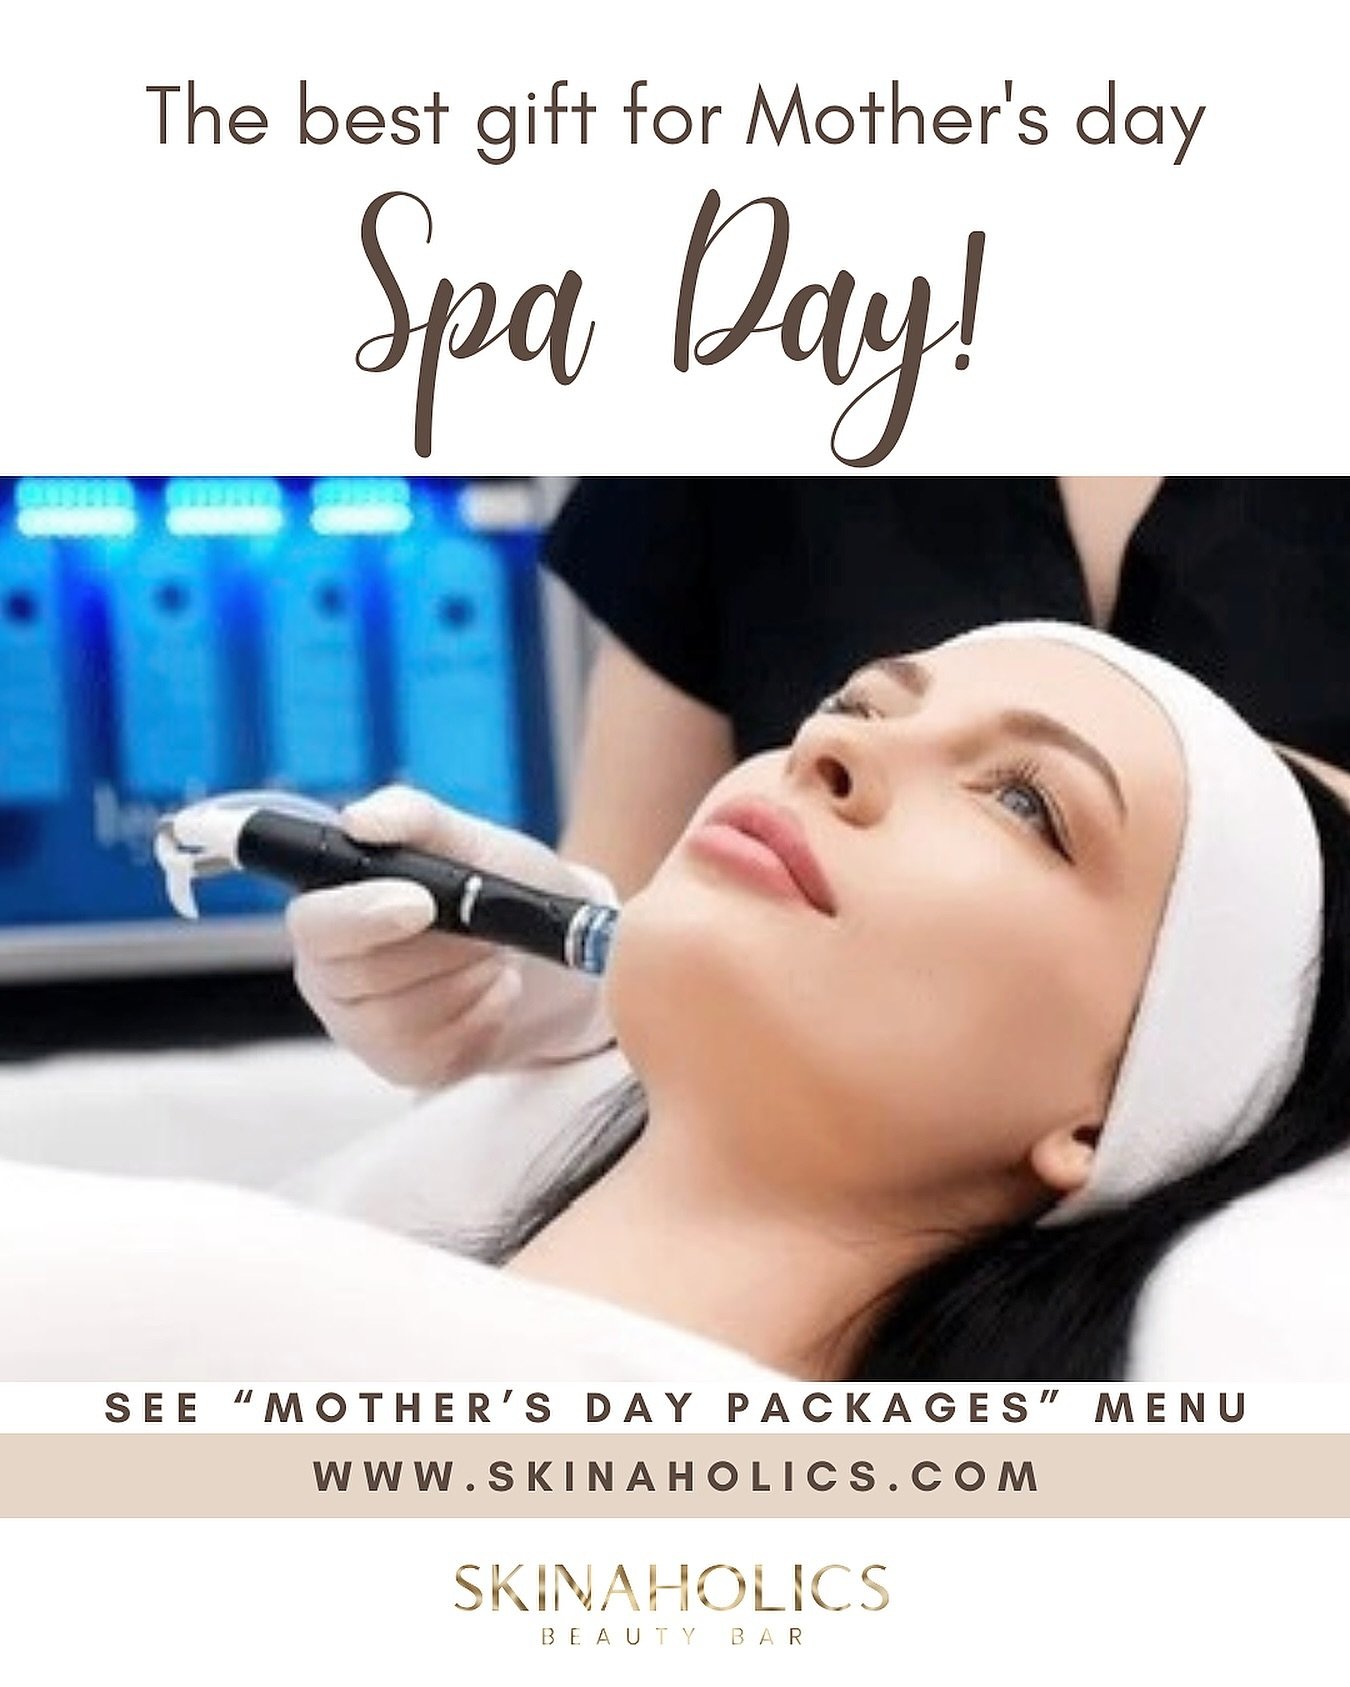 Excited to pamper all the beautiful mamas🤗💐

WWW.SKINAHOLICS.COM

#hydrafacial #skincare #beauty #healthyskin #facialtreatment #skin #facial #skinaholicsbeautybar #elpaseoesthetician #palmdesert